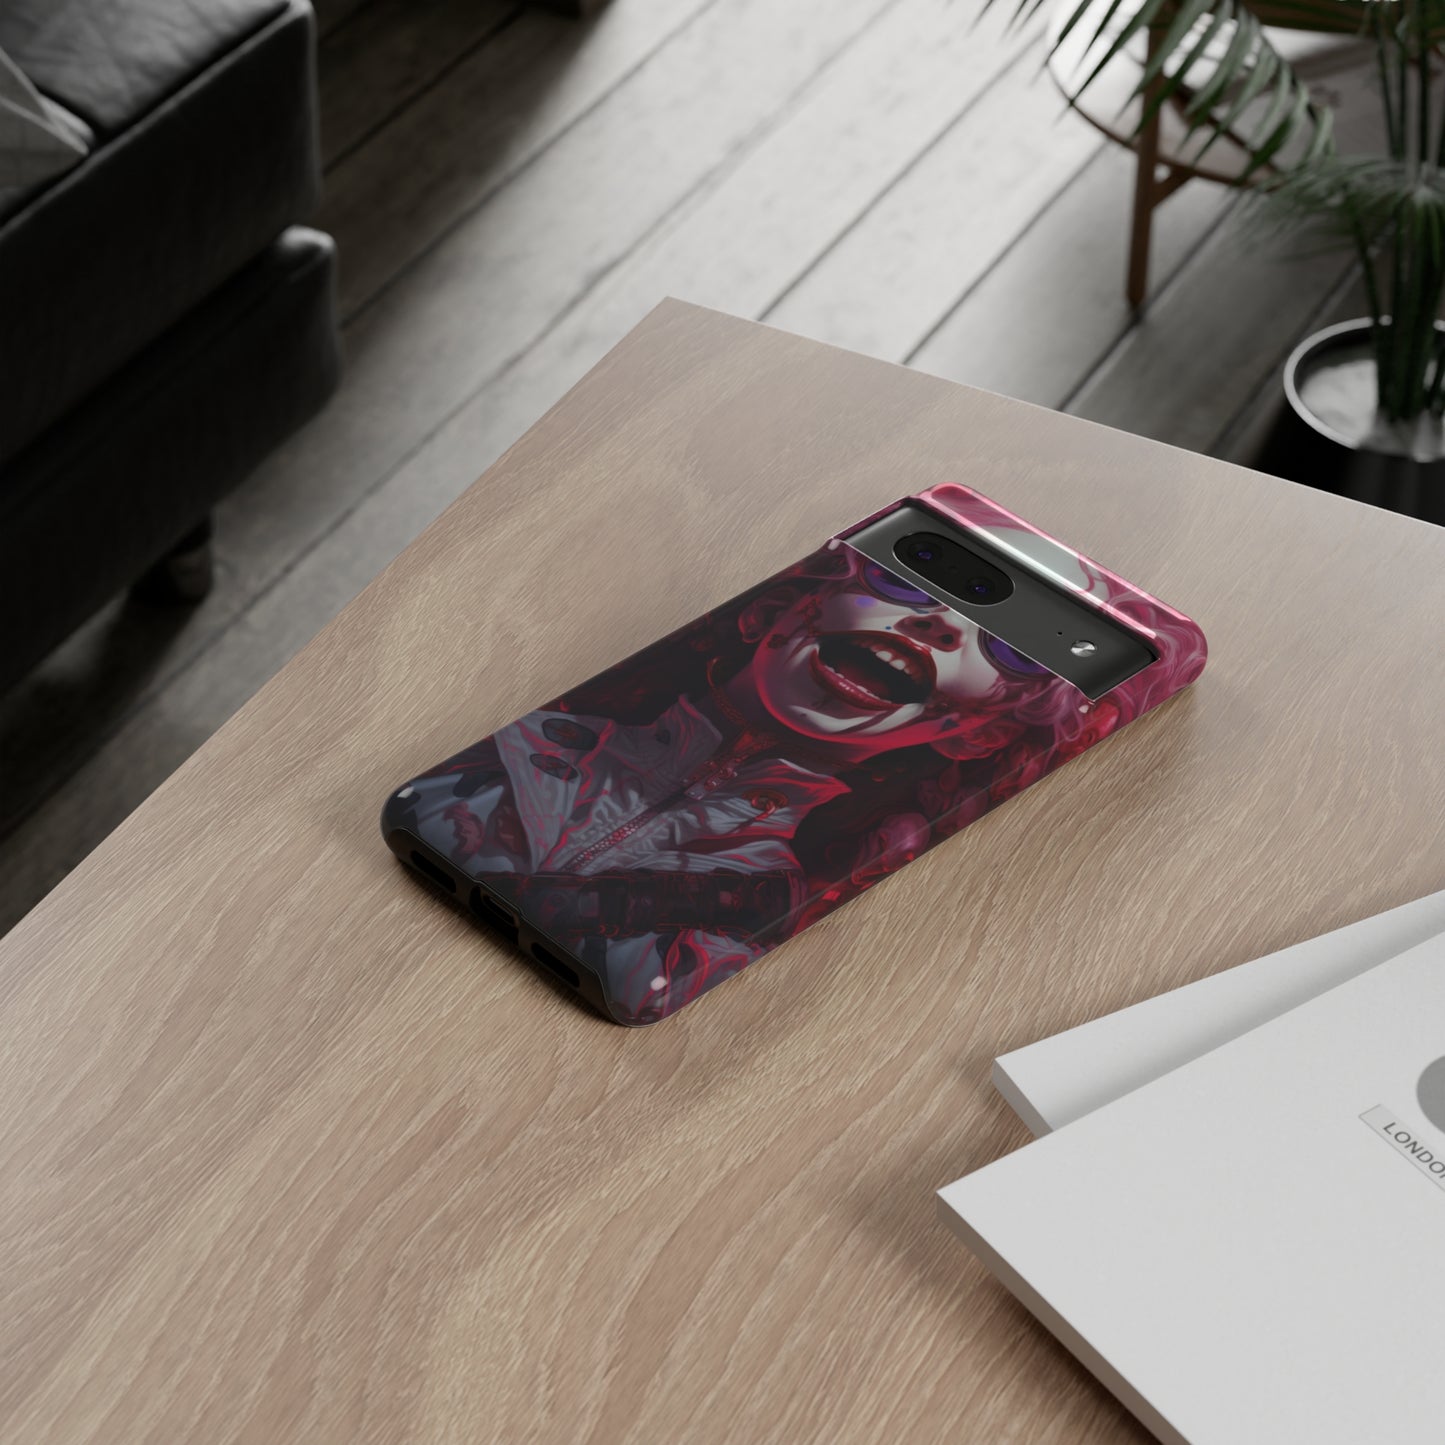 Joyful Chaos: Gothcore Female Villain in Red Lipstick Phone Case for iPhone, Samsung, Pixel